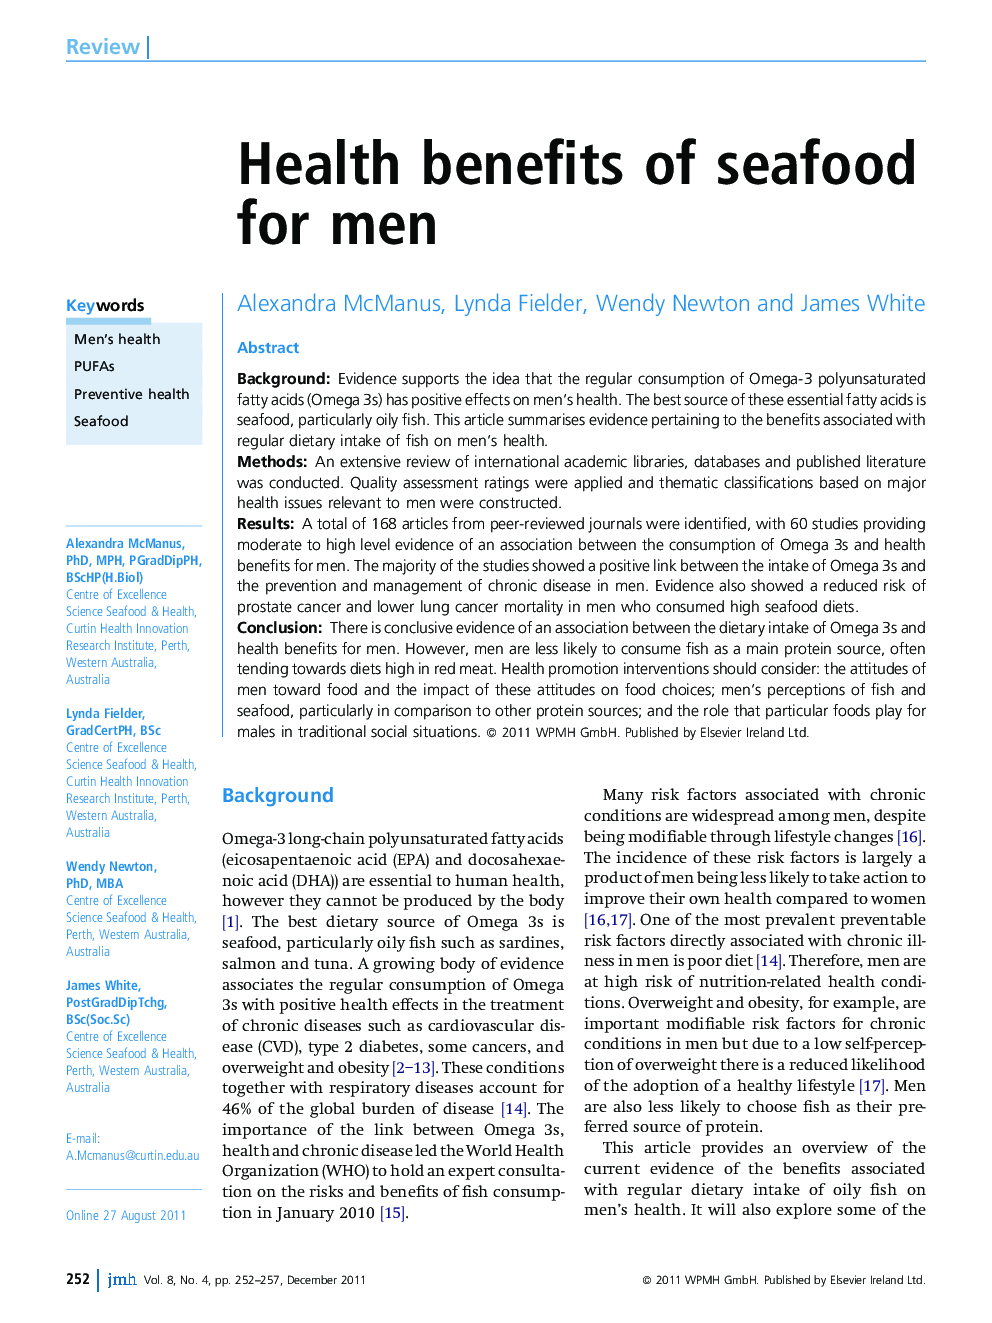 Health benefits of seafood for men